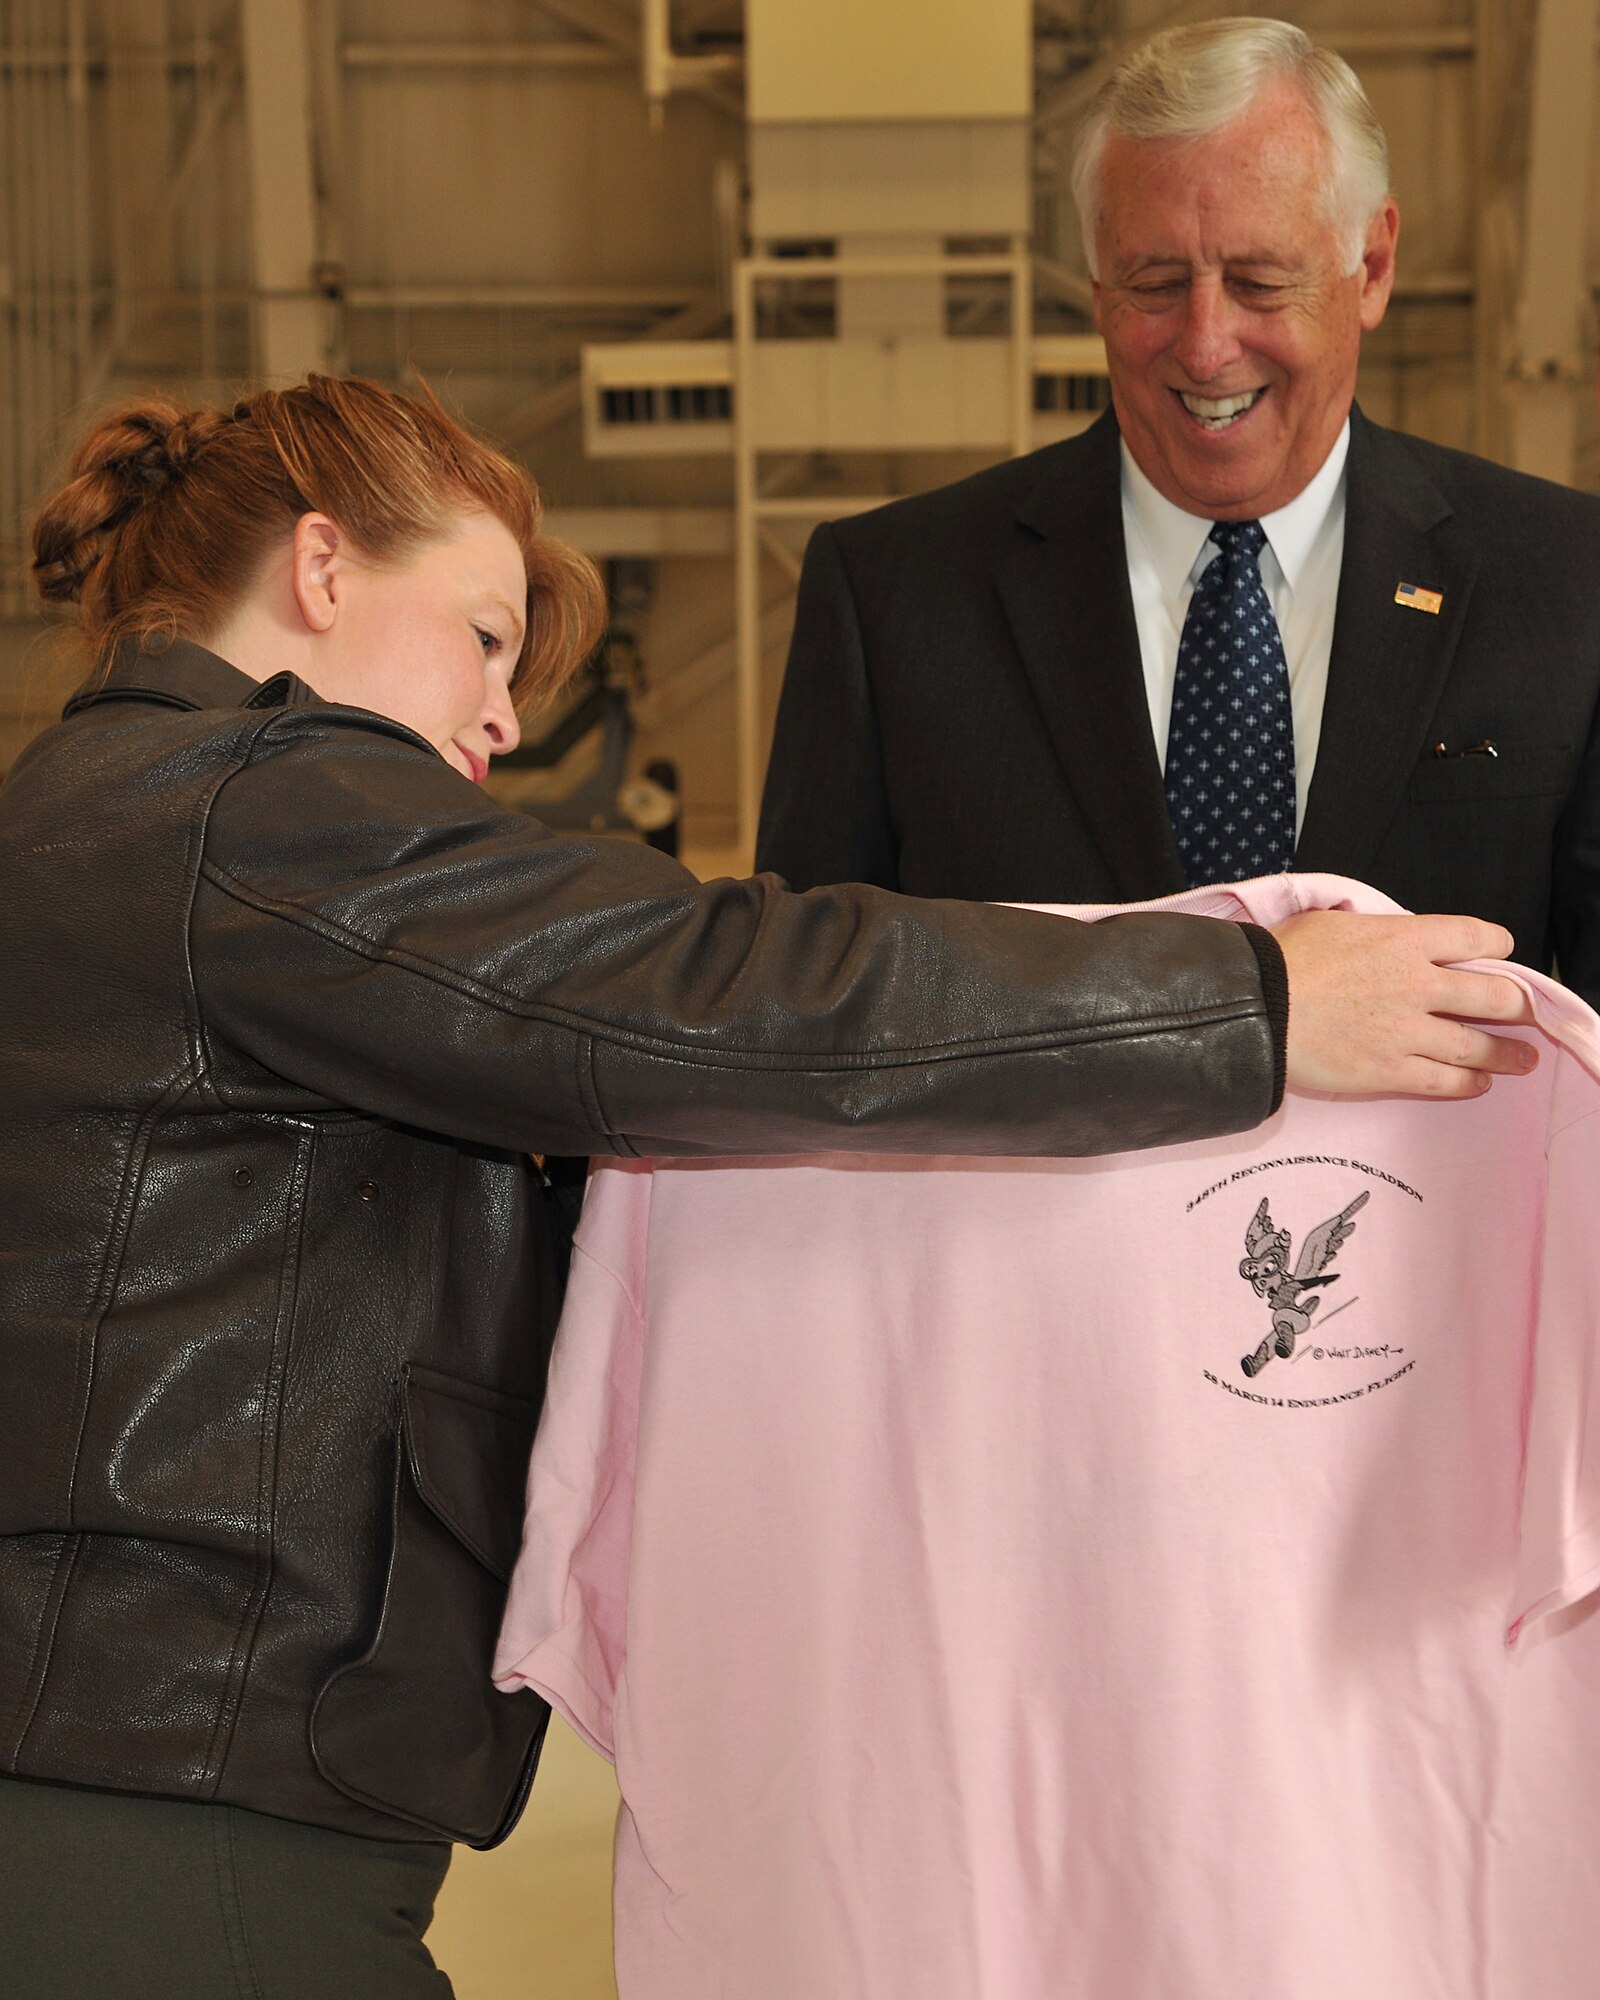 Lt. Col. Amanda Brandt, 348th Reconnaissance Squadron commander, presents Congressman Steny Hoyer with a t-shirt during a base visit Aug. 28, 2014, on Grand Forks Air Force Base, N.D. Hoyer visited the base to learn about the Global Hawk mission and the integration of unmanned aircraft into commercial airspace. (U.S. Air Force photo/Senior Airman Xavier Navarro) 